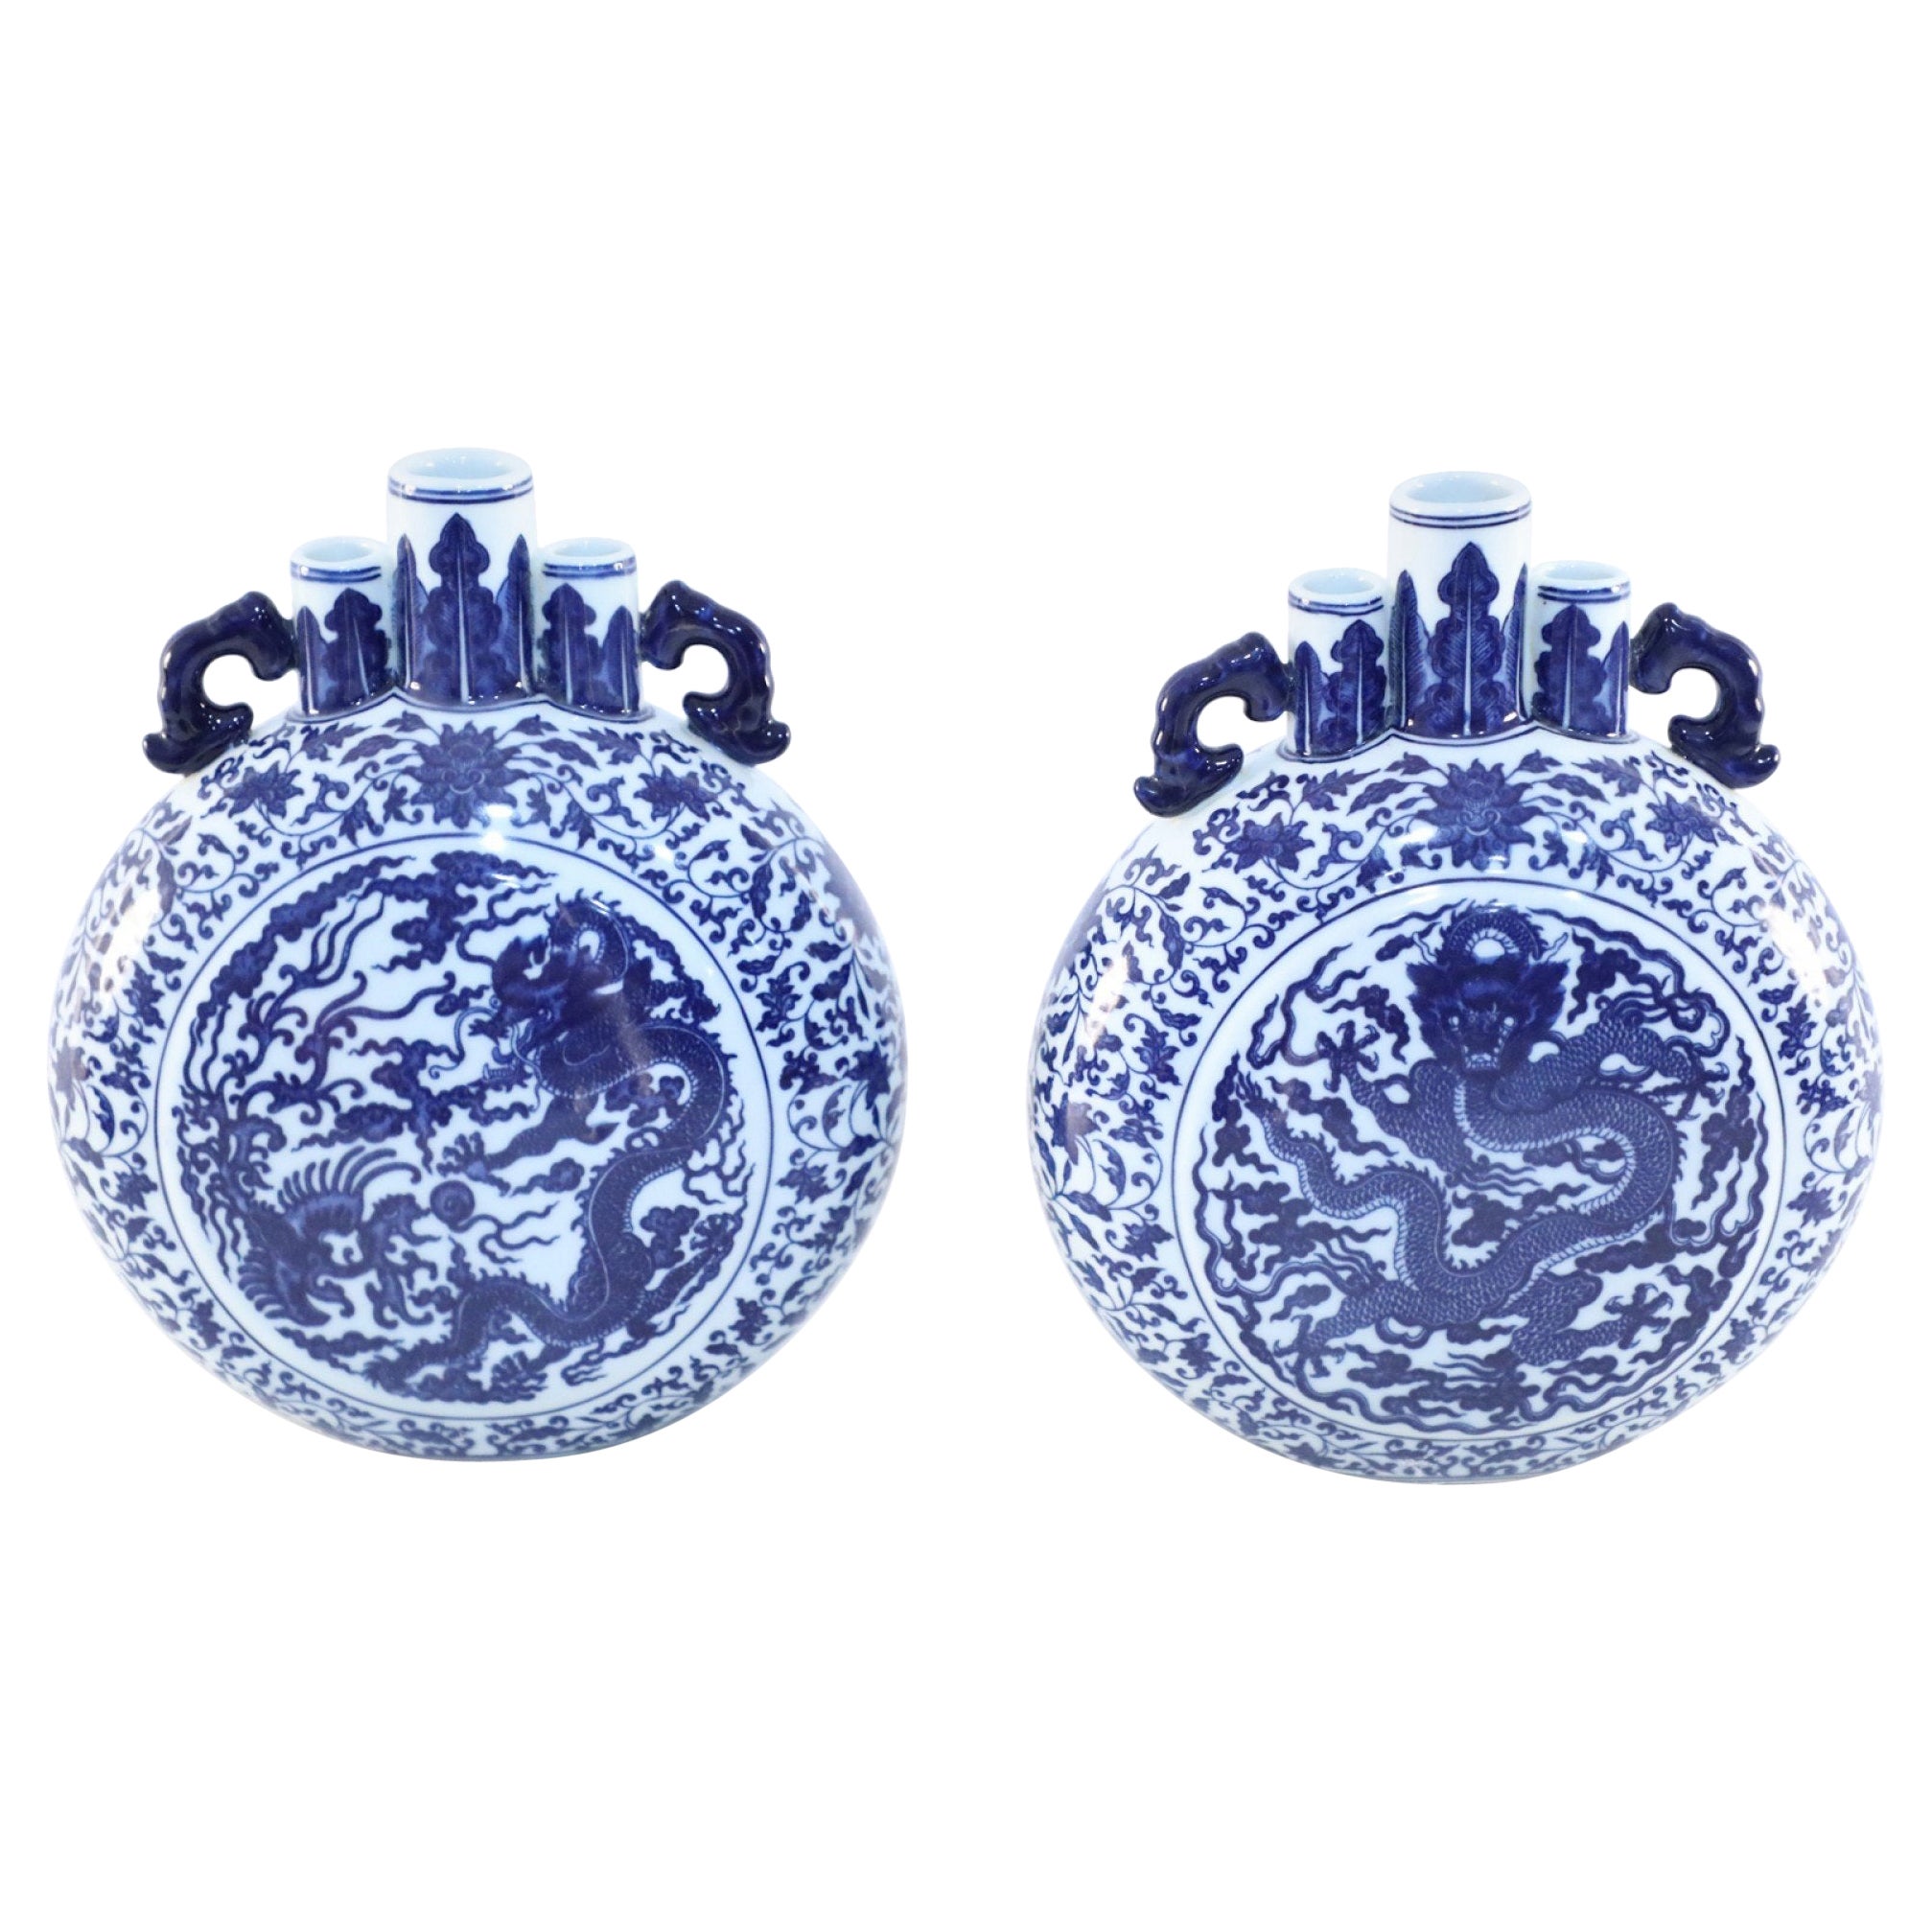 Pair of Chinese Blue and White Porcelain Moon Flask Vases